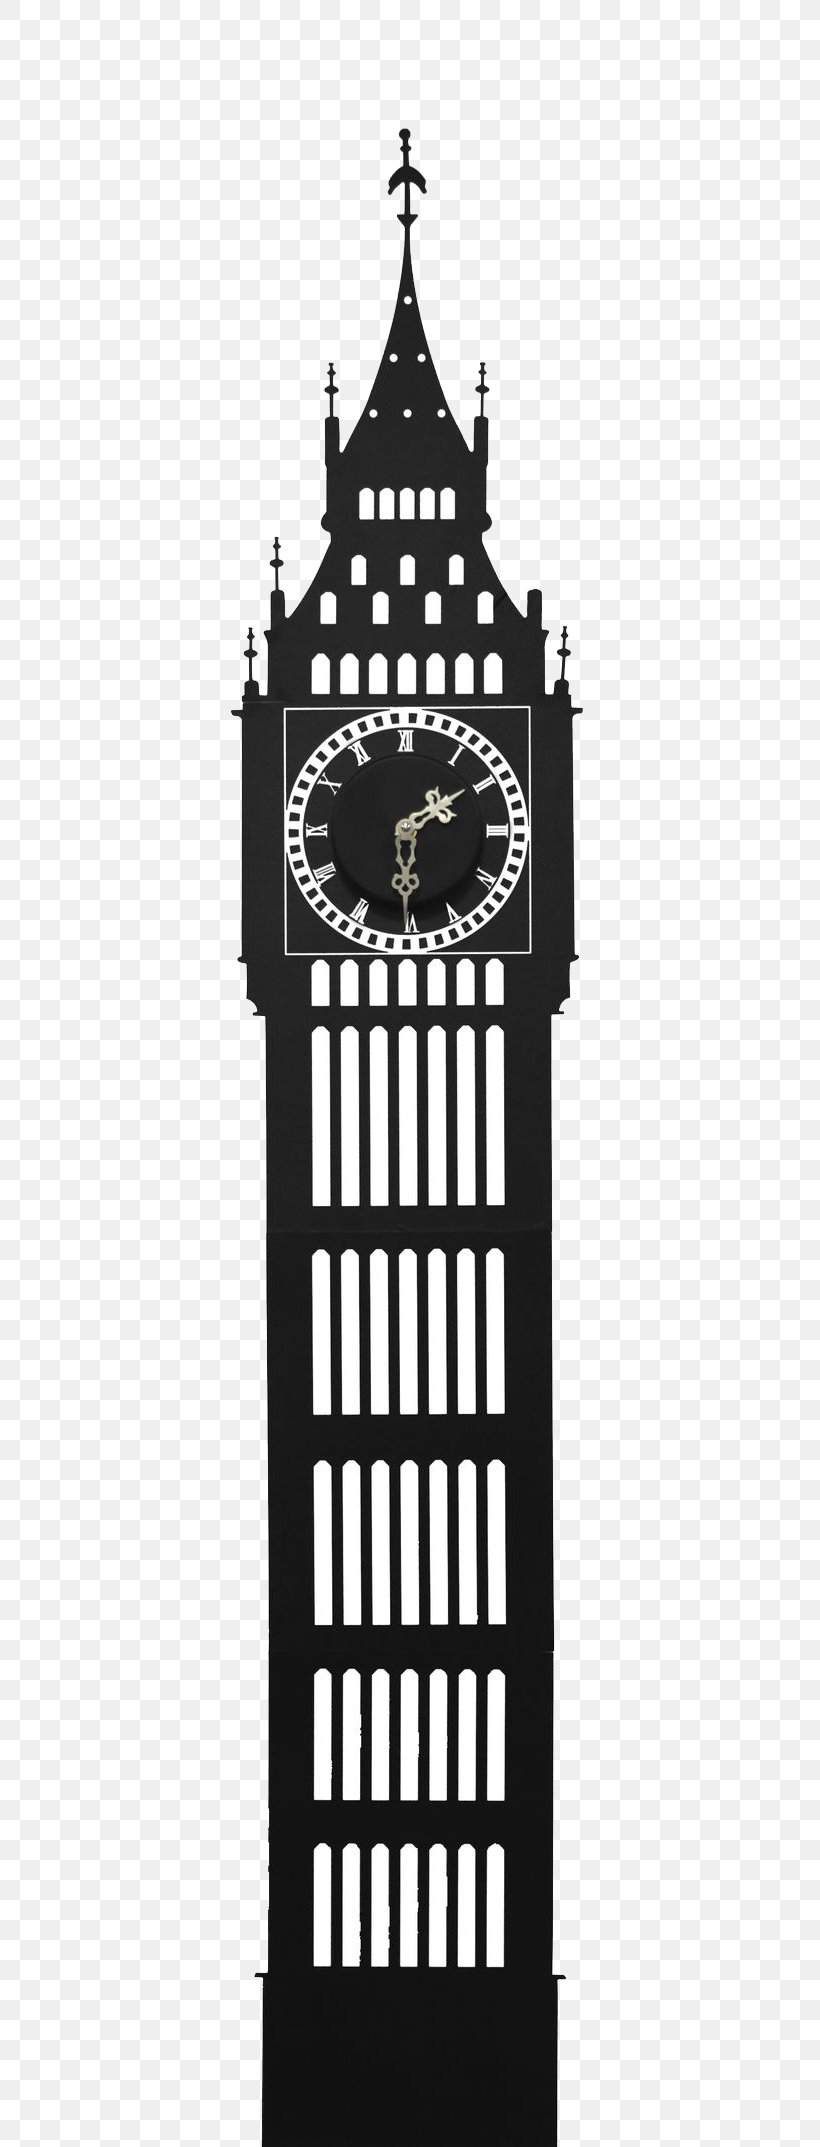 Big Ben Silhouette Wall Decal Clip Art, PNG, 736x2147px, Big Ben, Black And White, Clock, Clock Tower, Decal Download Free